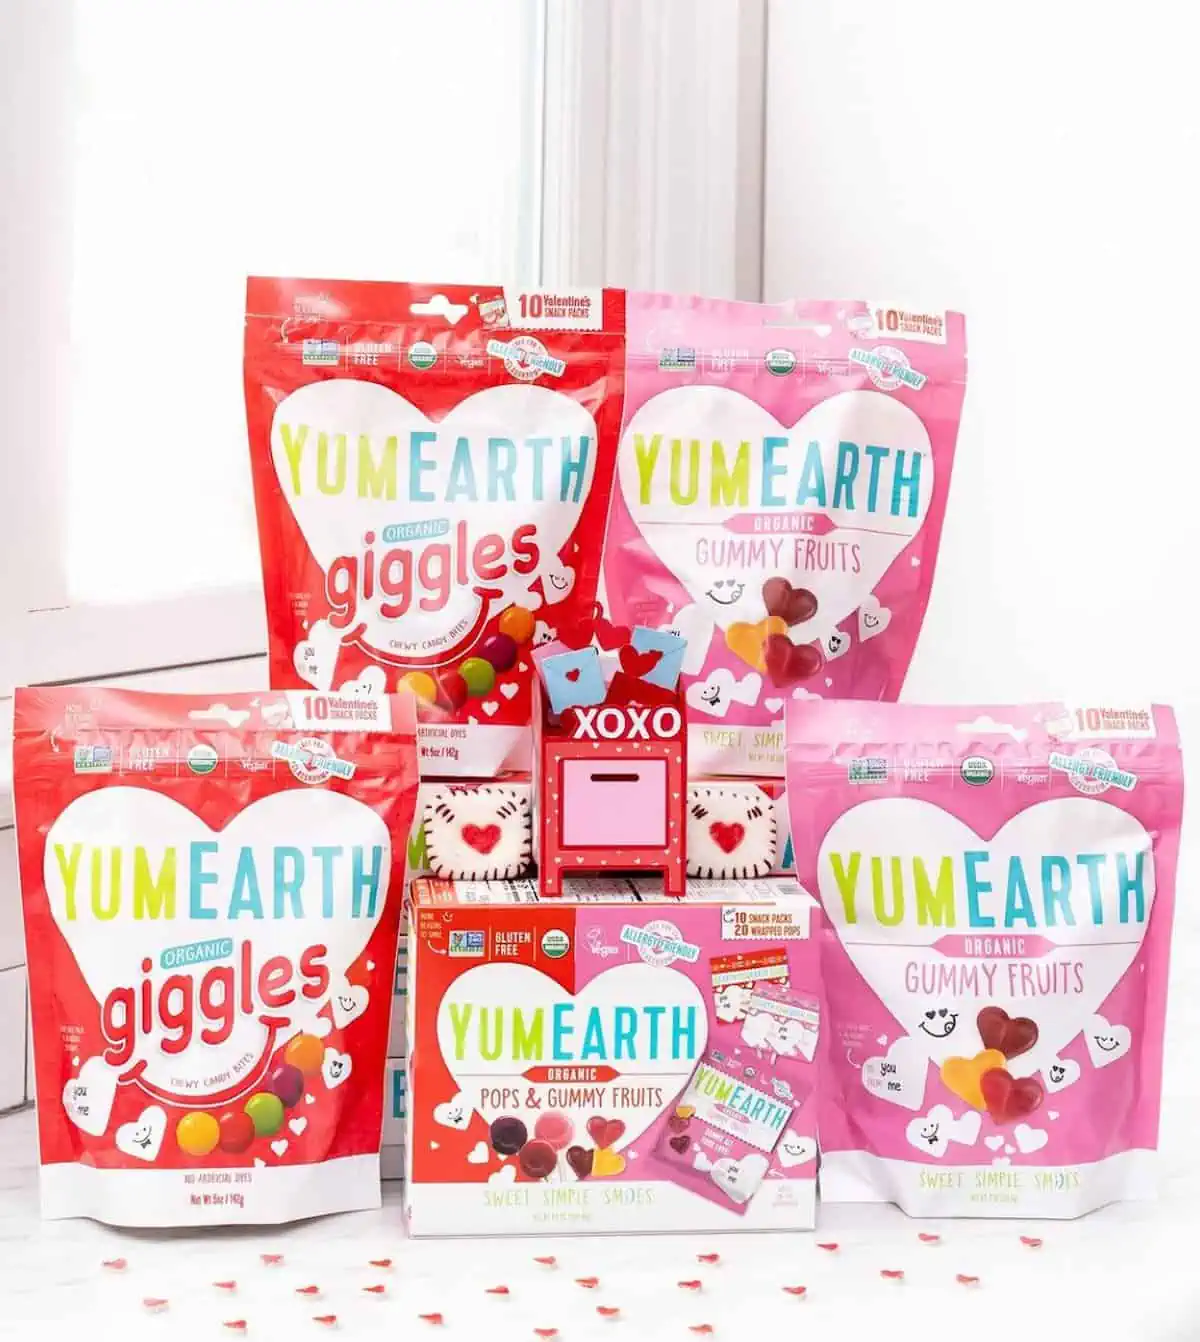 A variety of different bags of Valentine-theme candies from YumEarth.